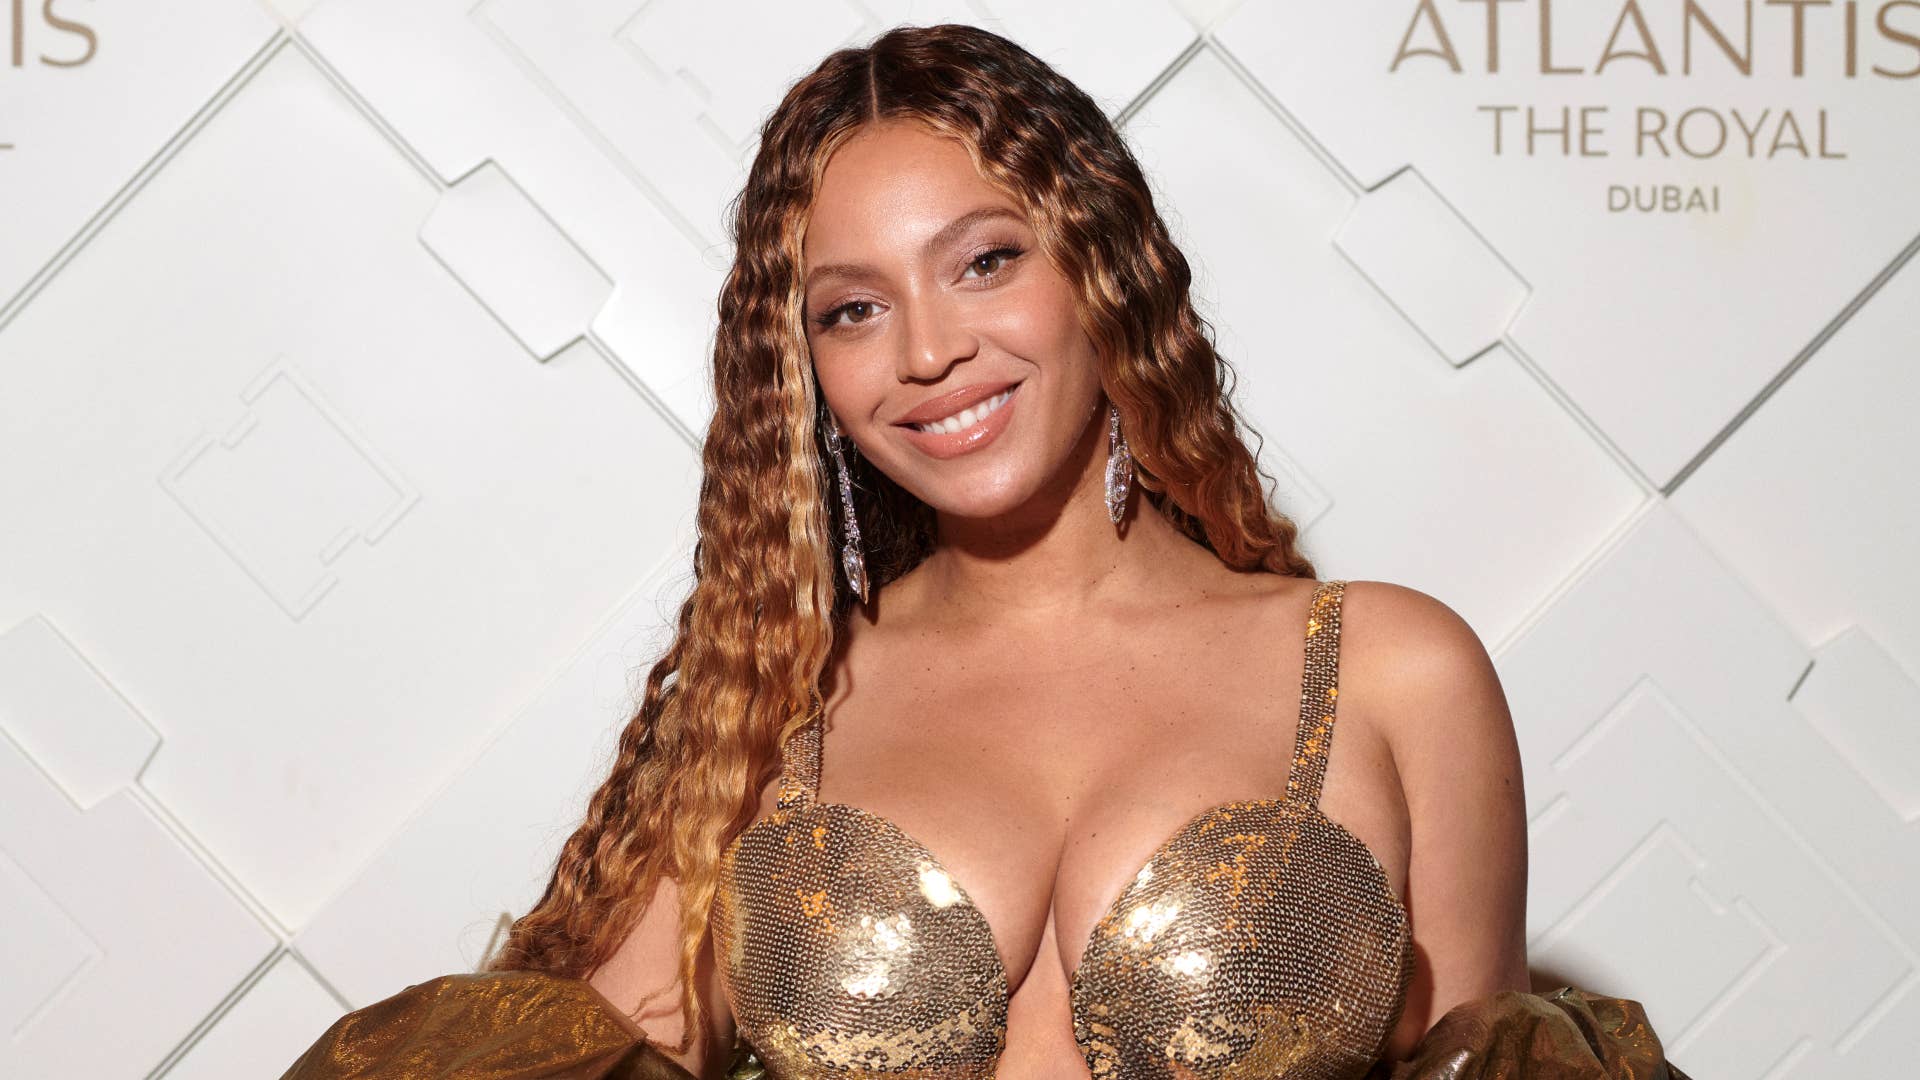 Beyonce is seen on a red carpet